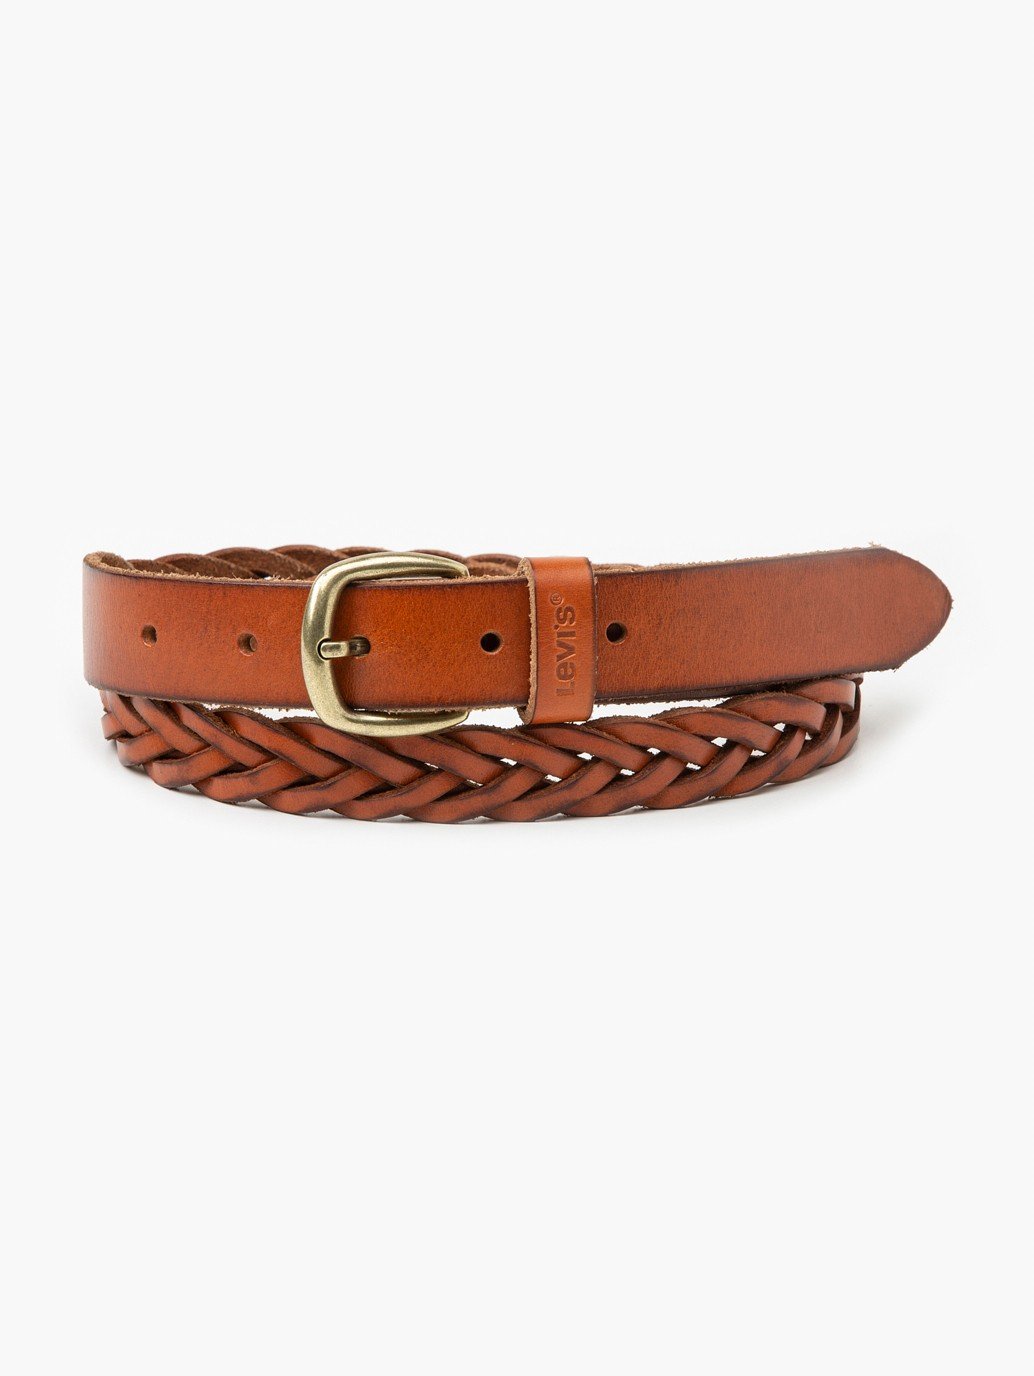 Buy Levi's® Women's Leather Braided Belt | Levi's® Official Online Store SG